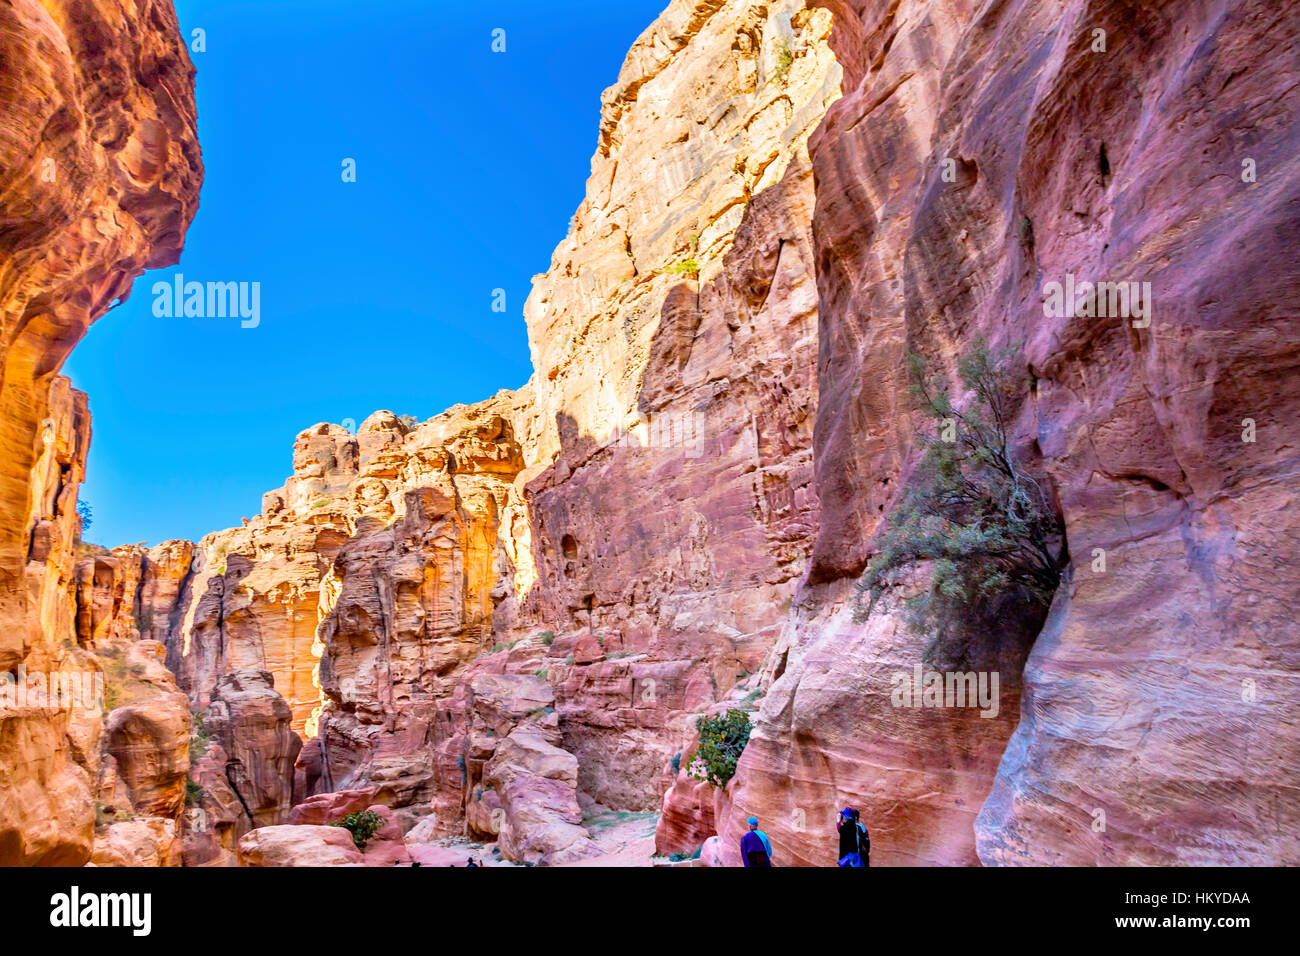 Outer Siq Canyon Hiking To Entrance Into Petra Jordan Petra Jordan.  Colorful Yellow Pink Canyon becomes rose red when sun goes. Stock Photo